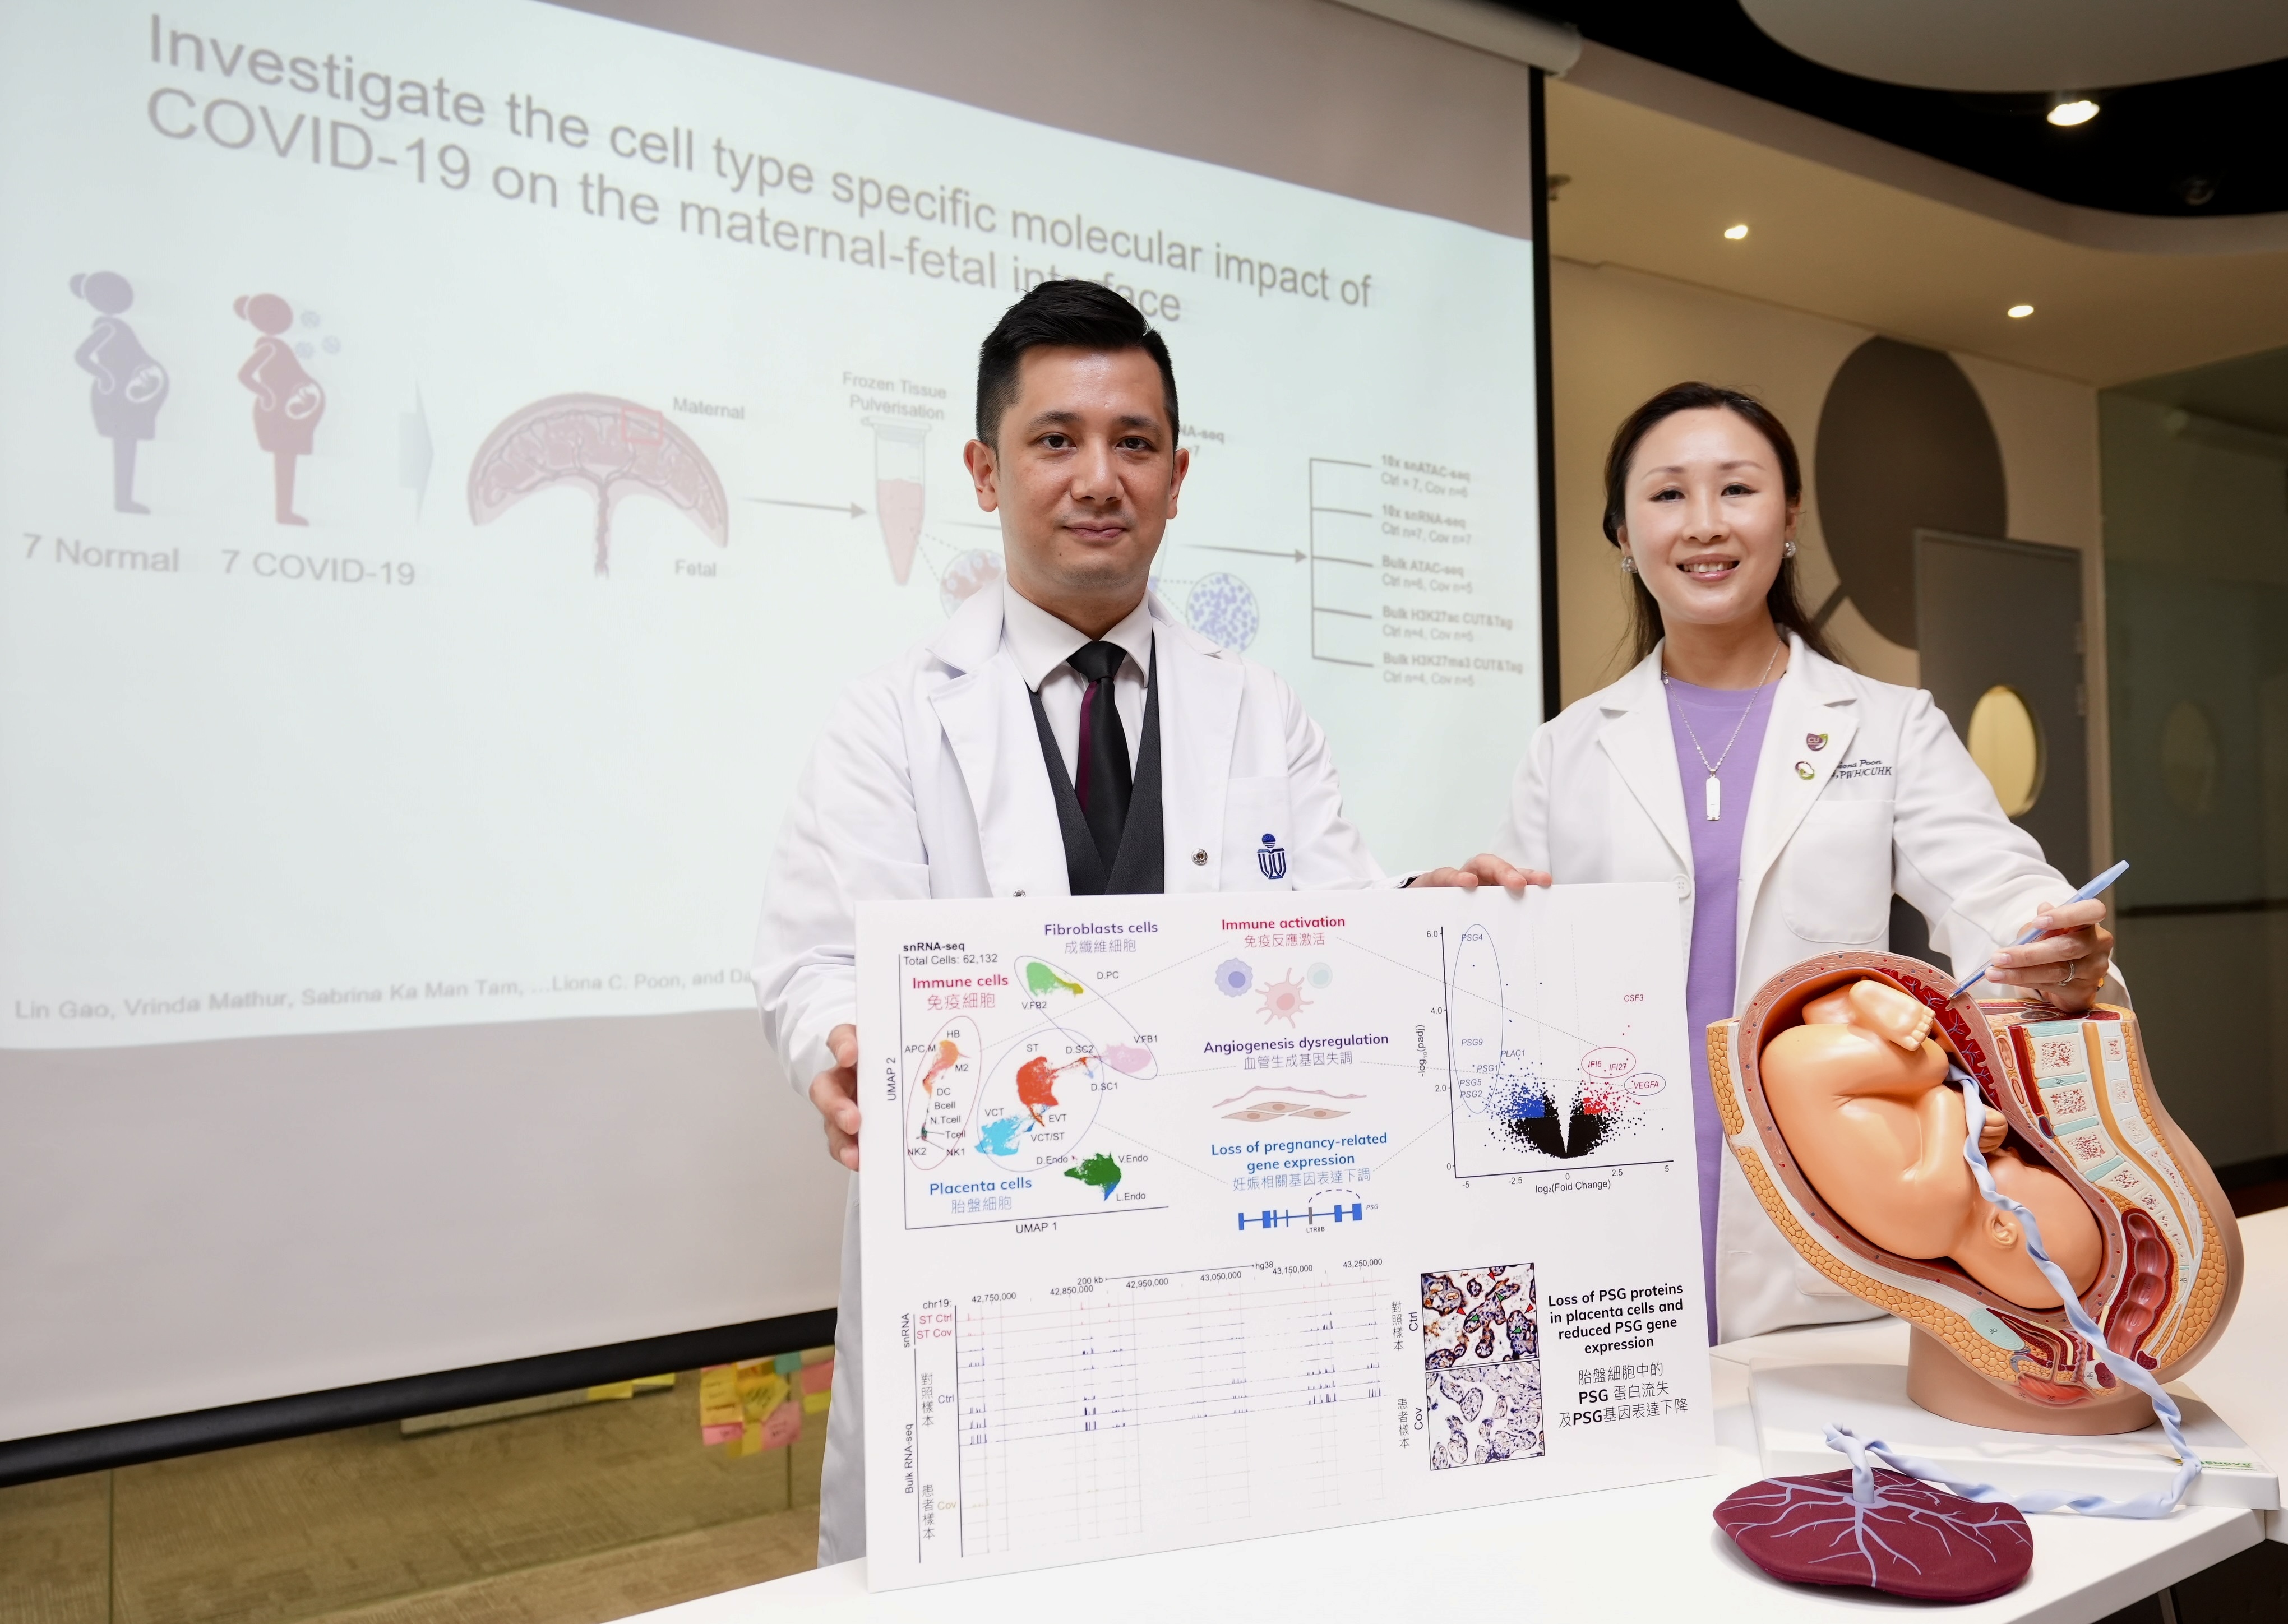 The research team is led by Prof. Danny LEUNG, Associate Professor of the Division of Life Science and Director of the Center for Epigenomics Research at HKUST (left), and Prof. Liona POON, Chairperson of the Department of Obstetrics and Gynaecology at CUHK’s Faculty of Medicine.